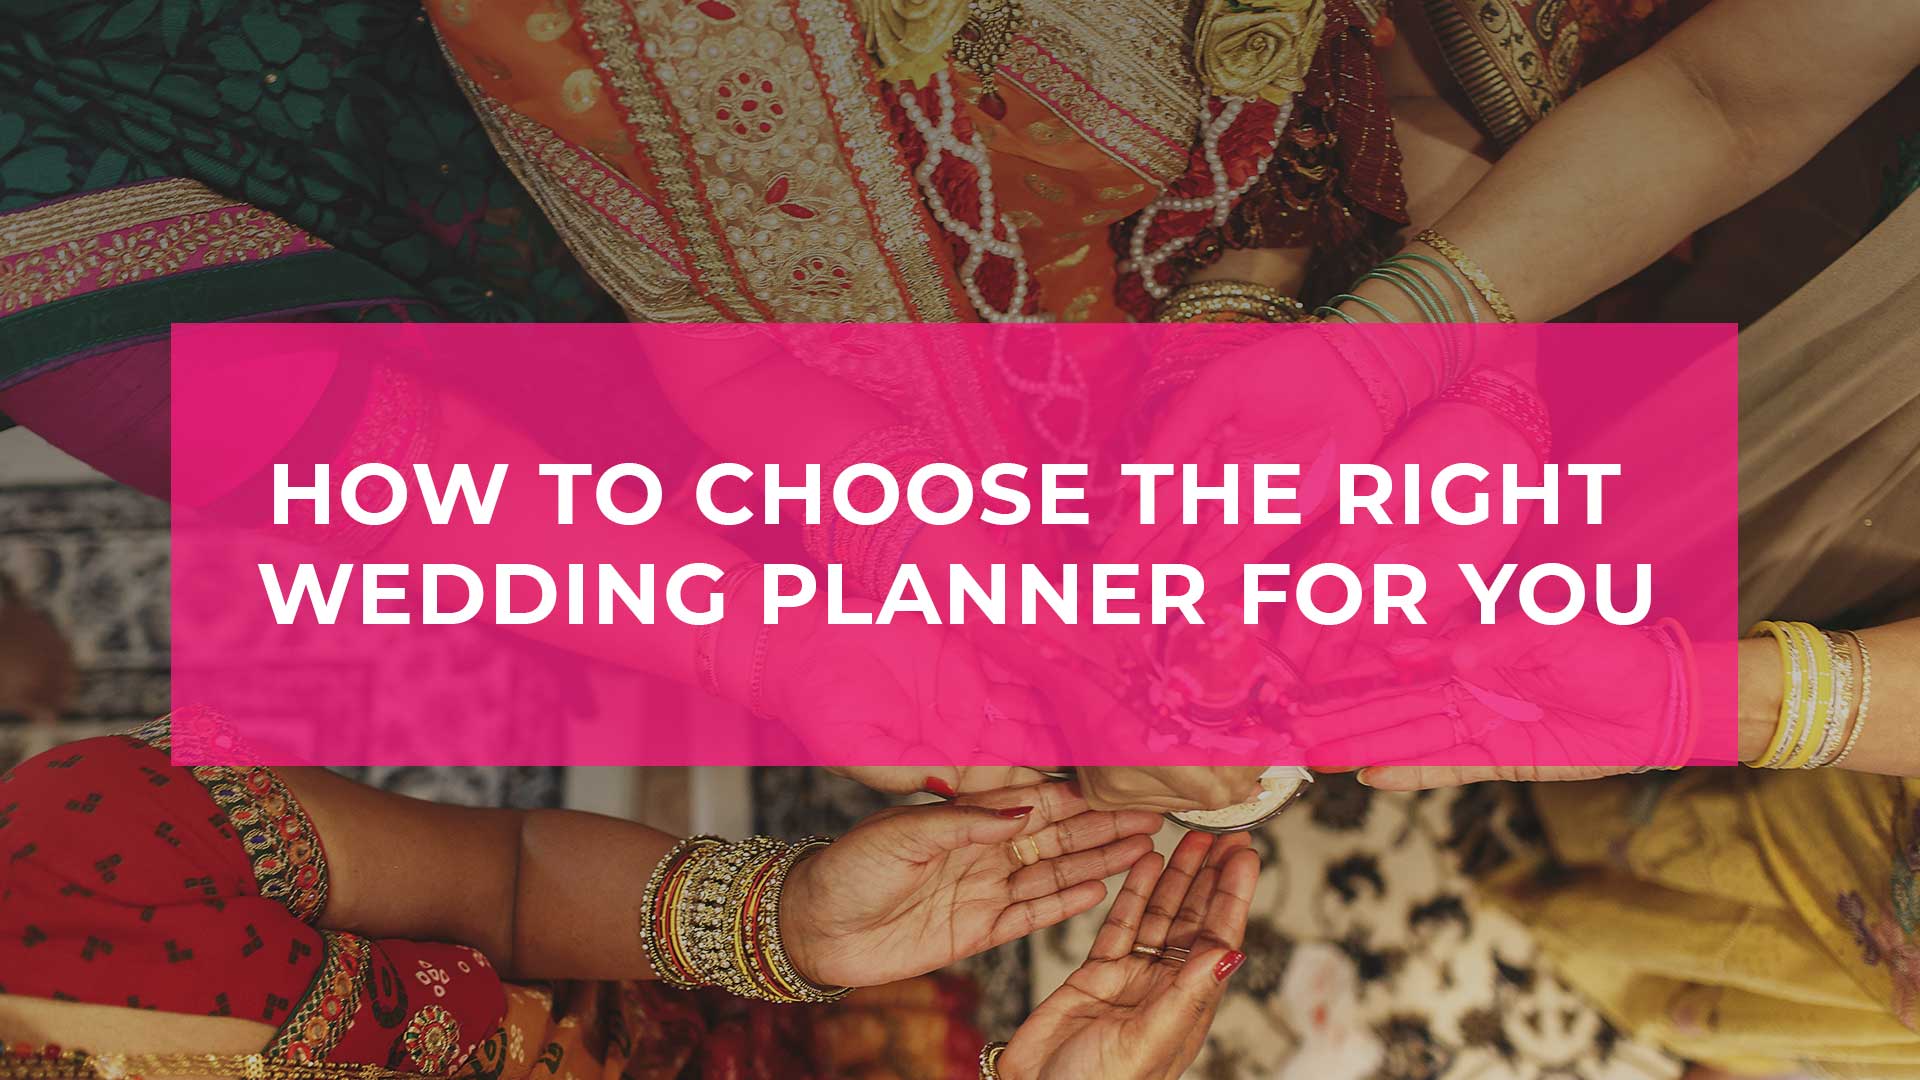 How To Choose the Right Wedding Planner For You